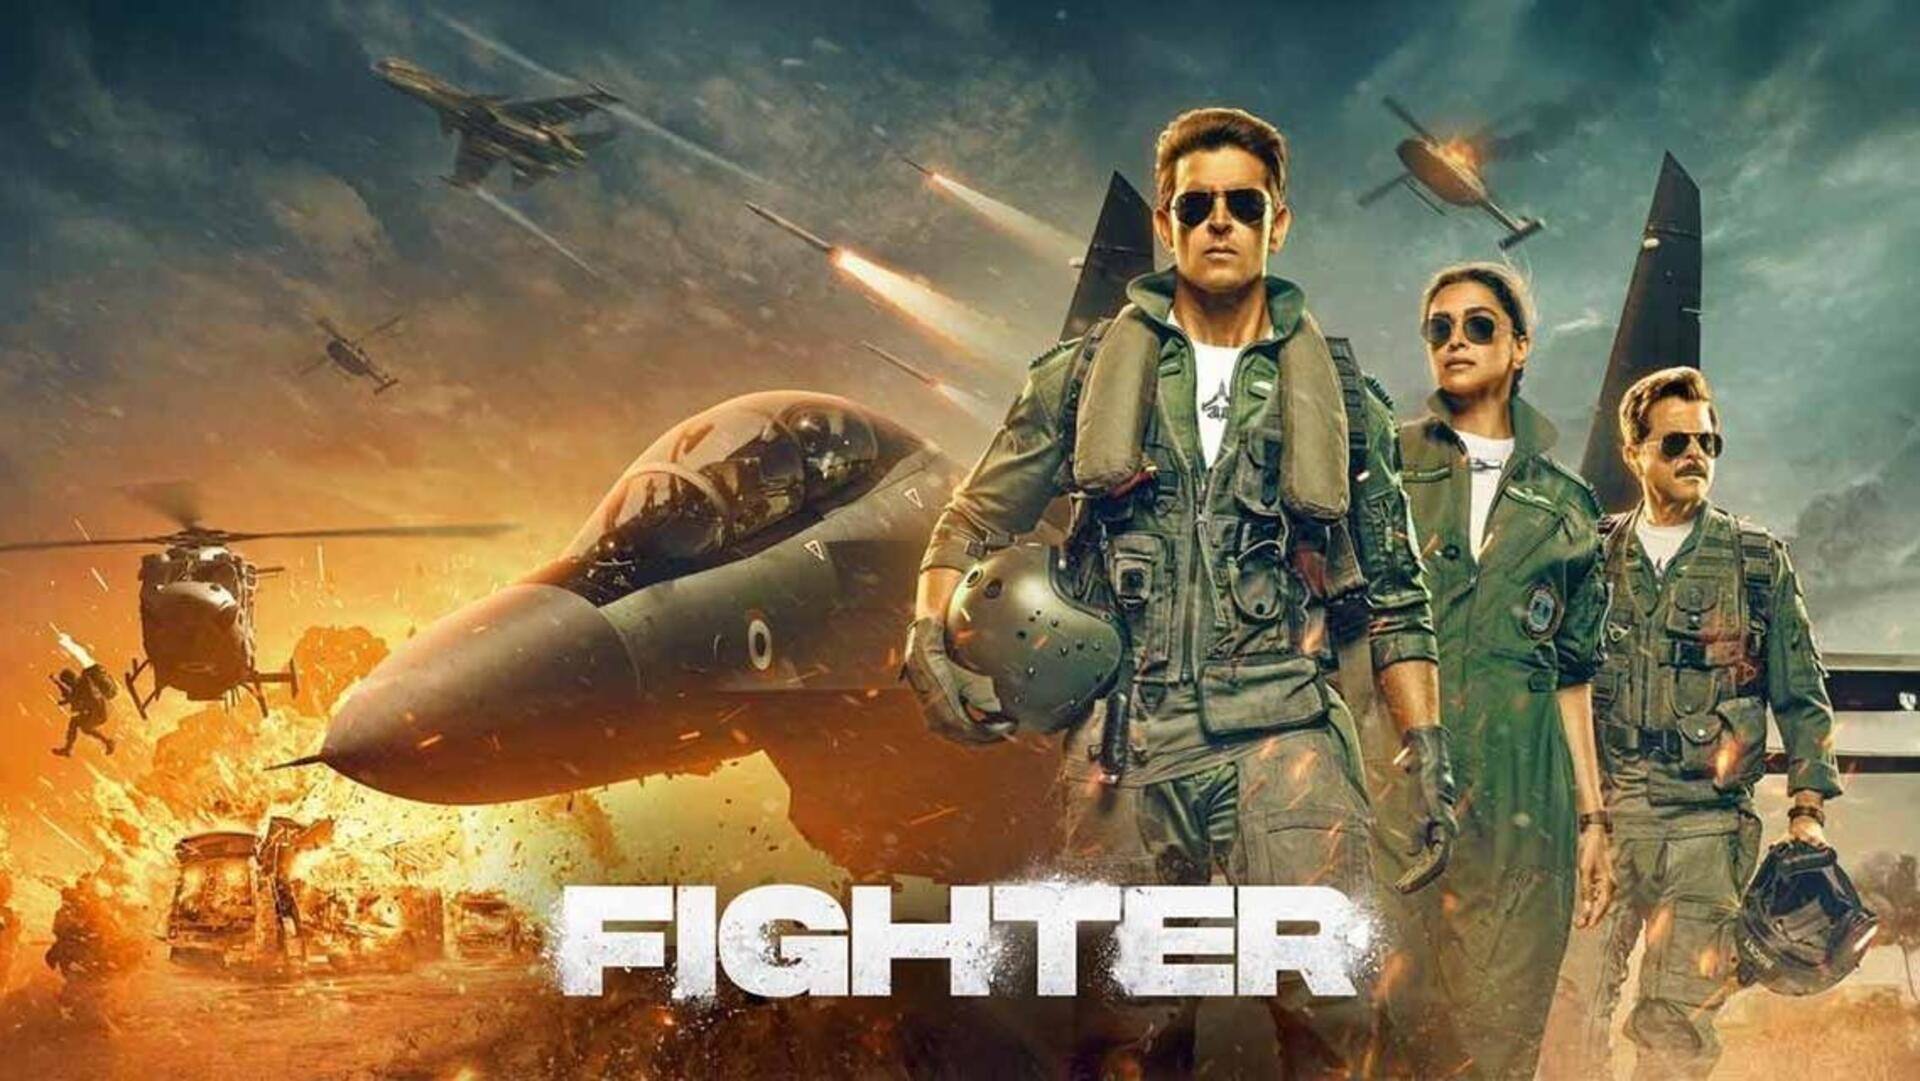 IAF band plays 'Spirit of Fighter' ahead of 'Fighter' release